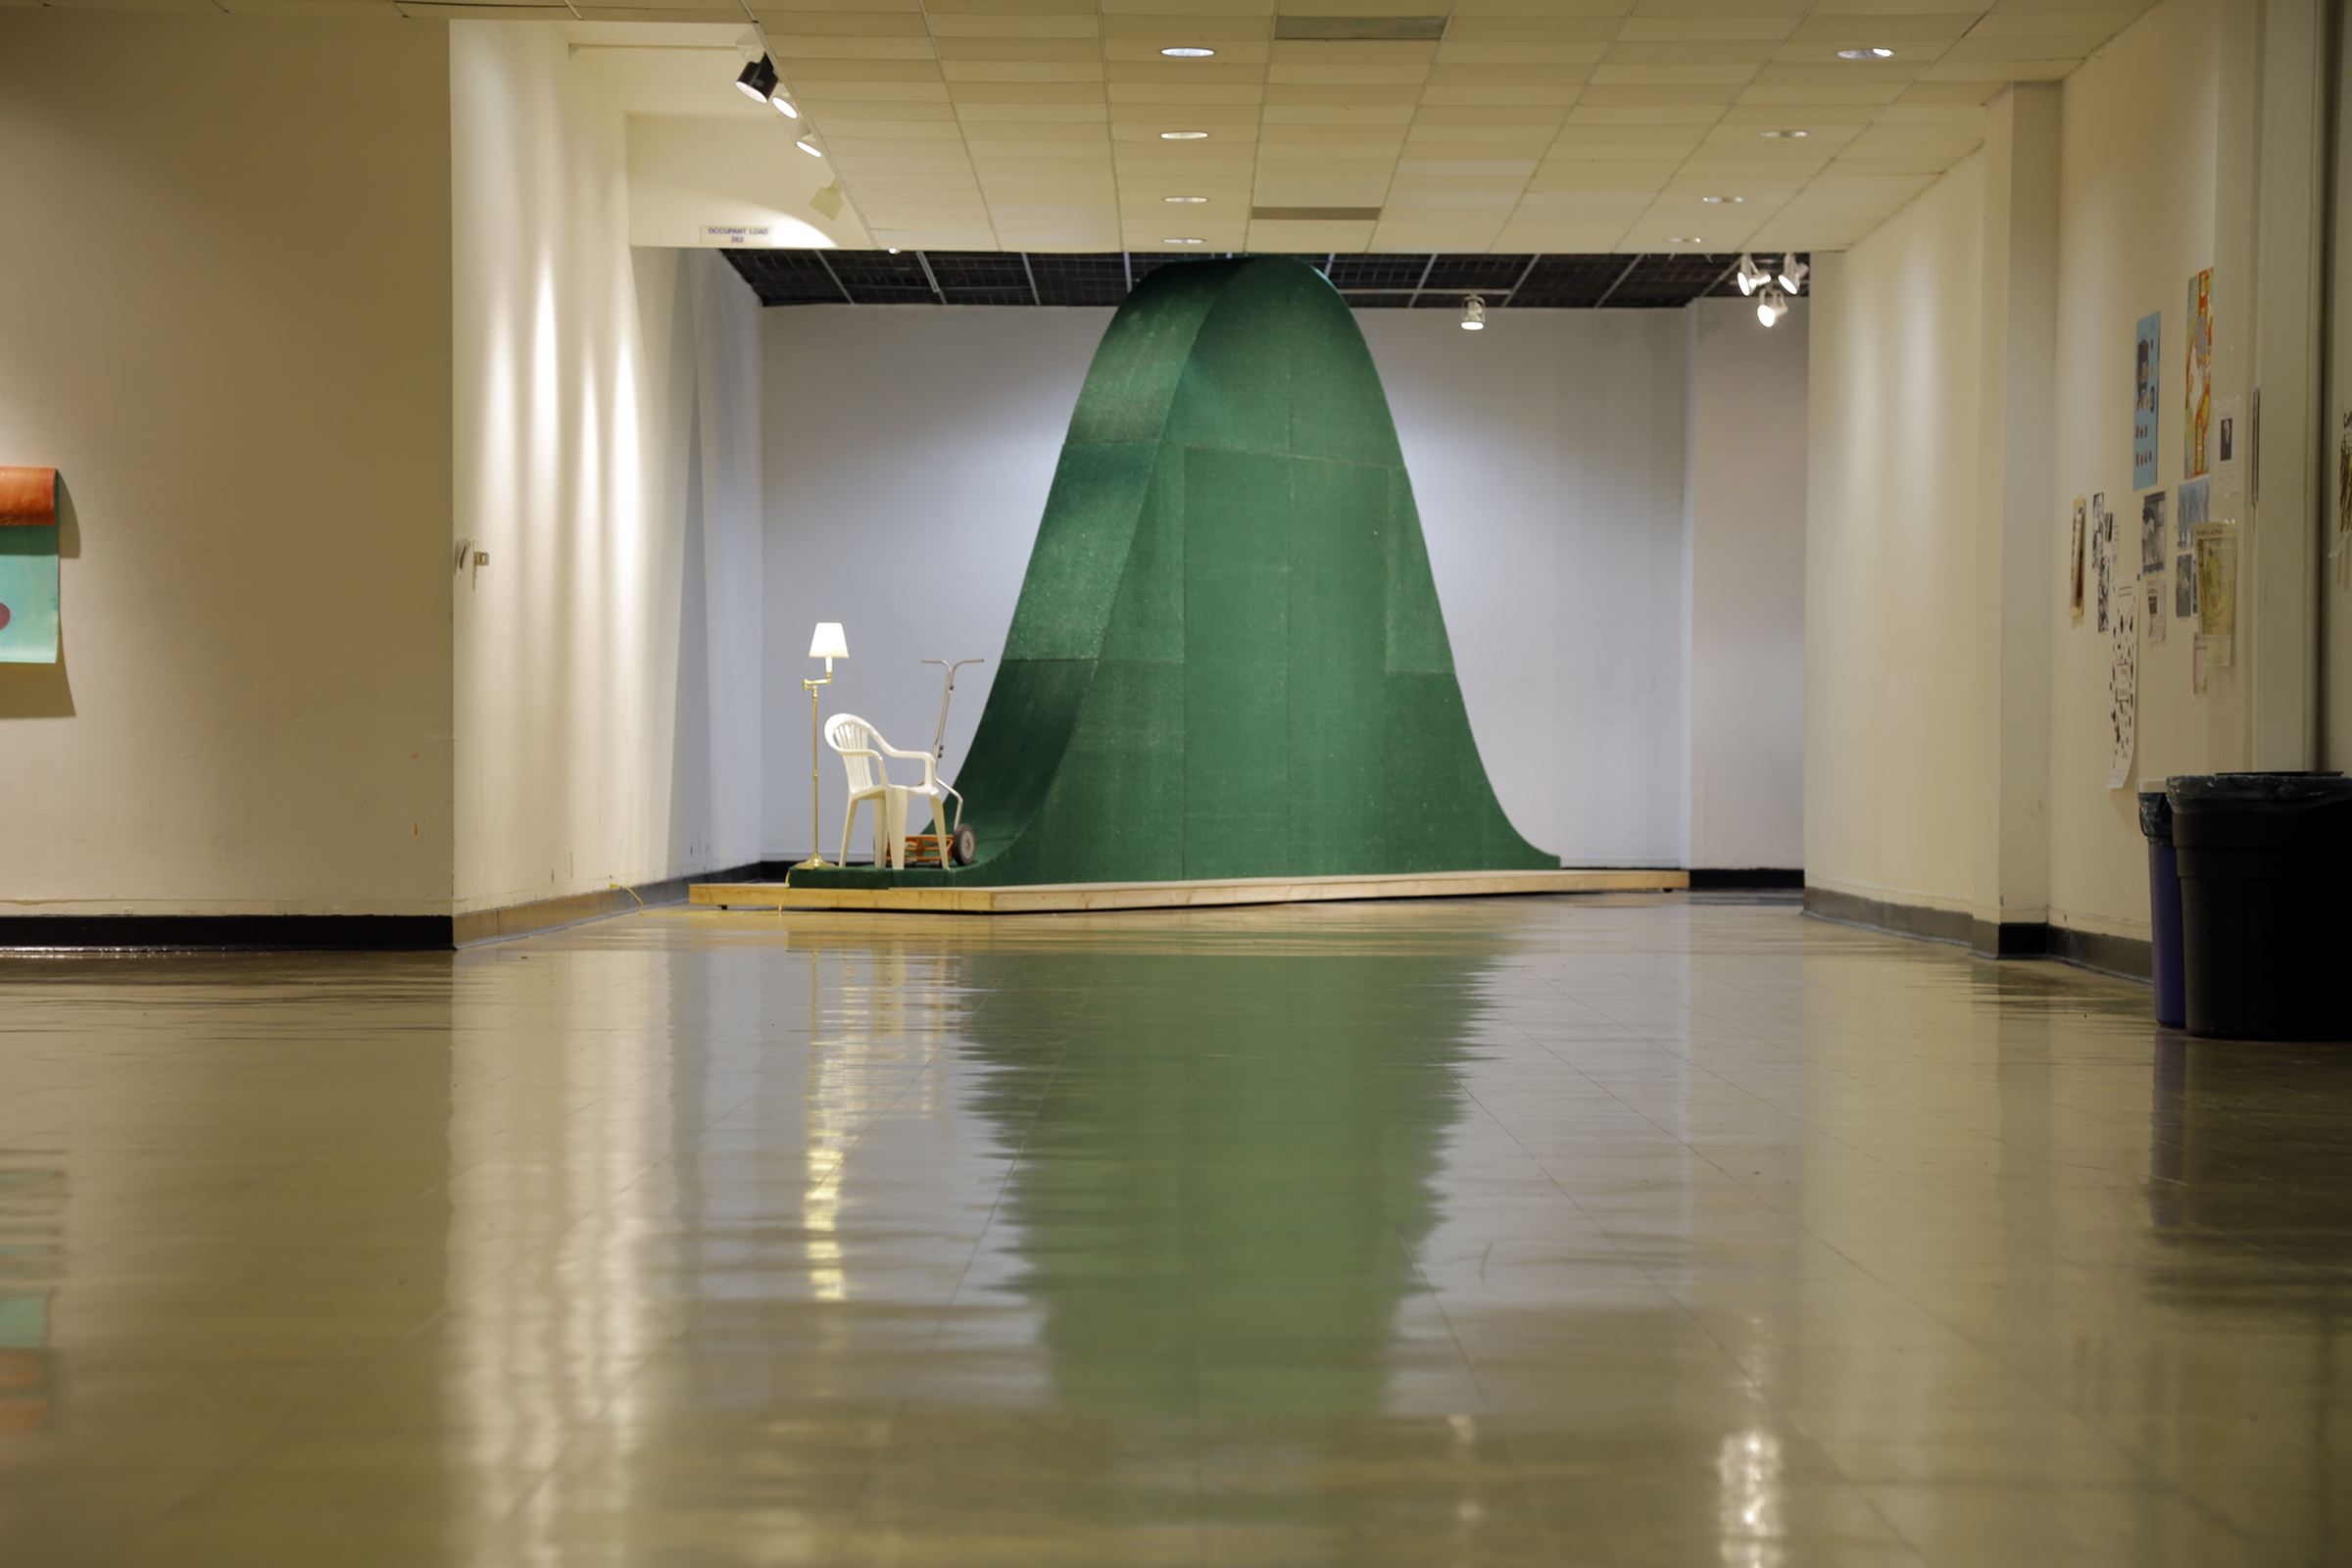 A photograph of a white plastic lawn chair next to a large, green, bell-curve shaped sculpture in a school hallway